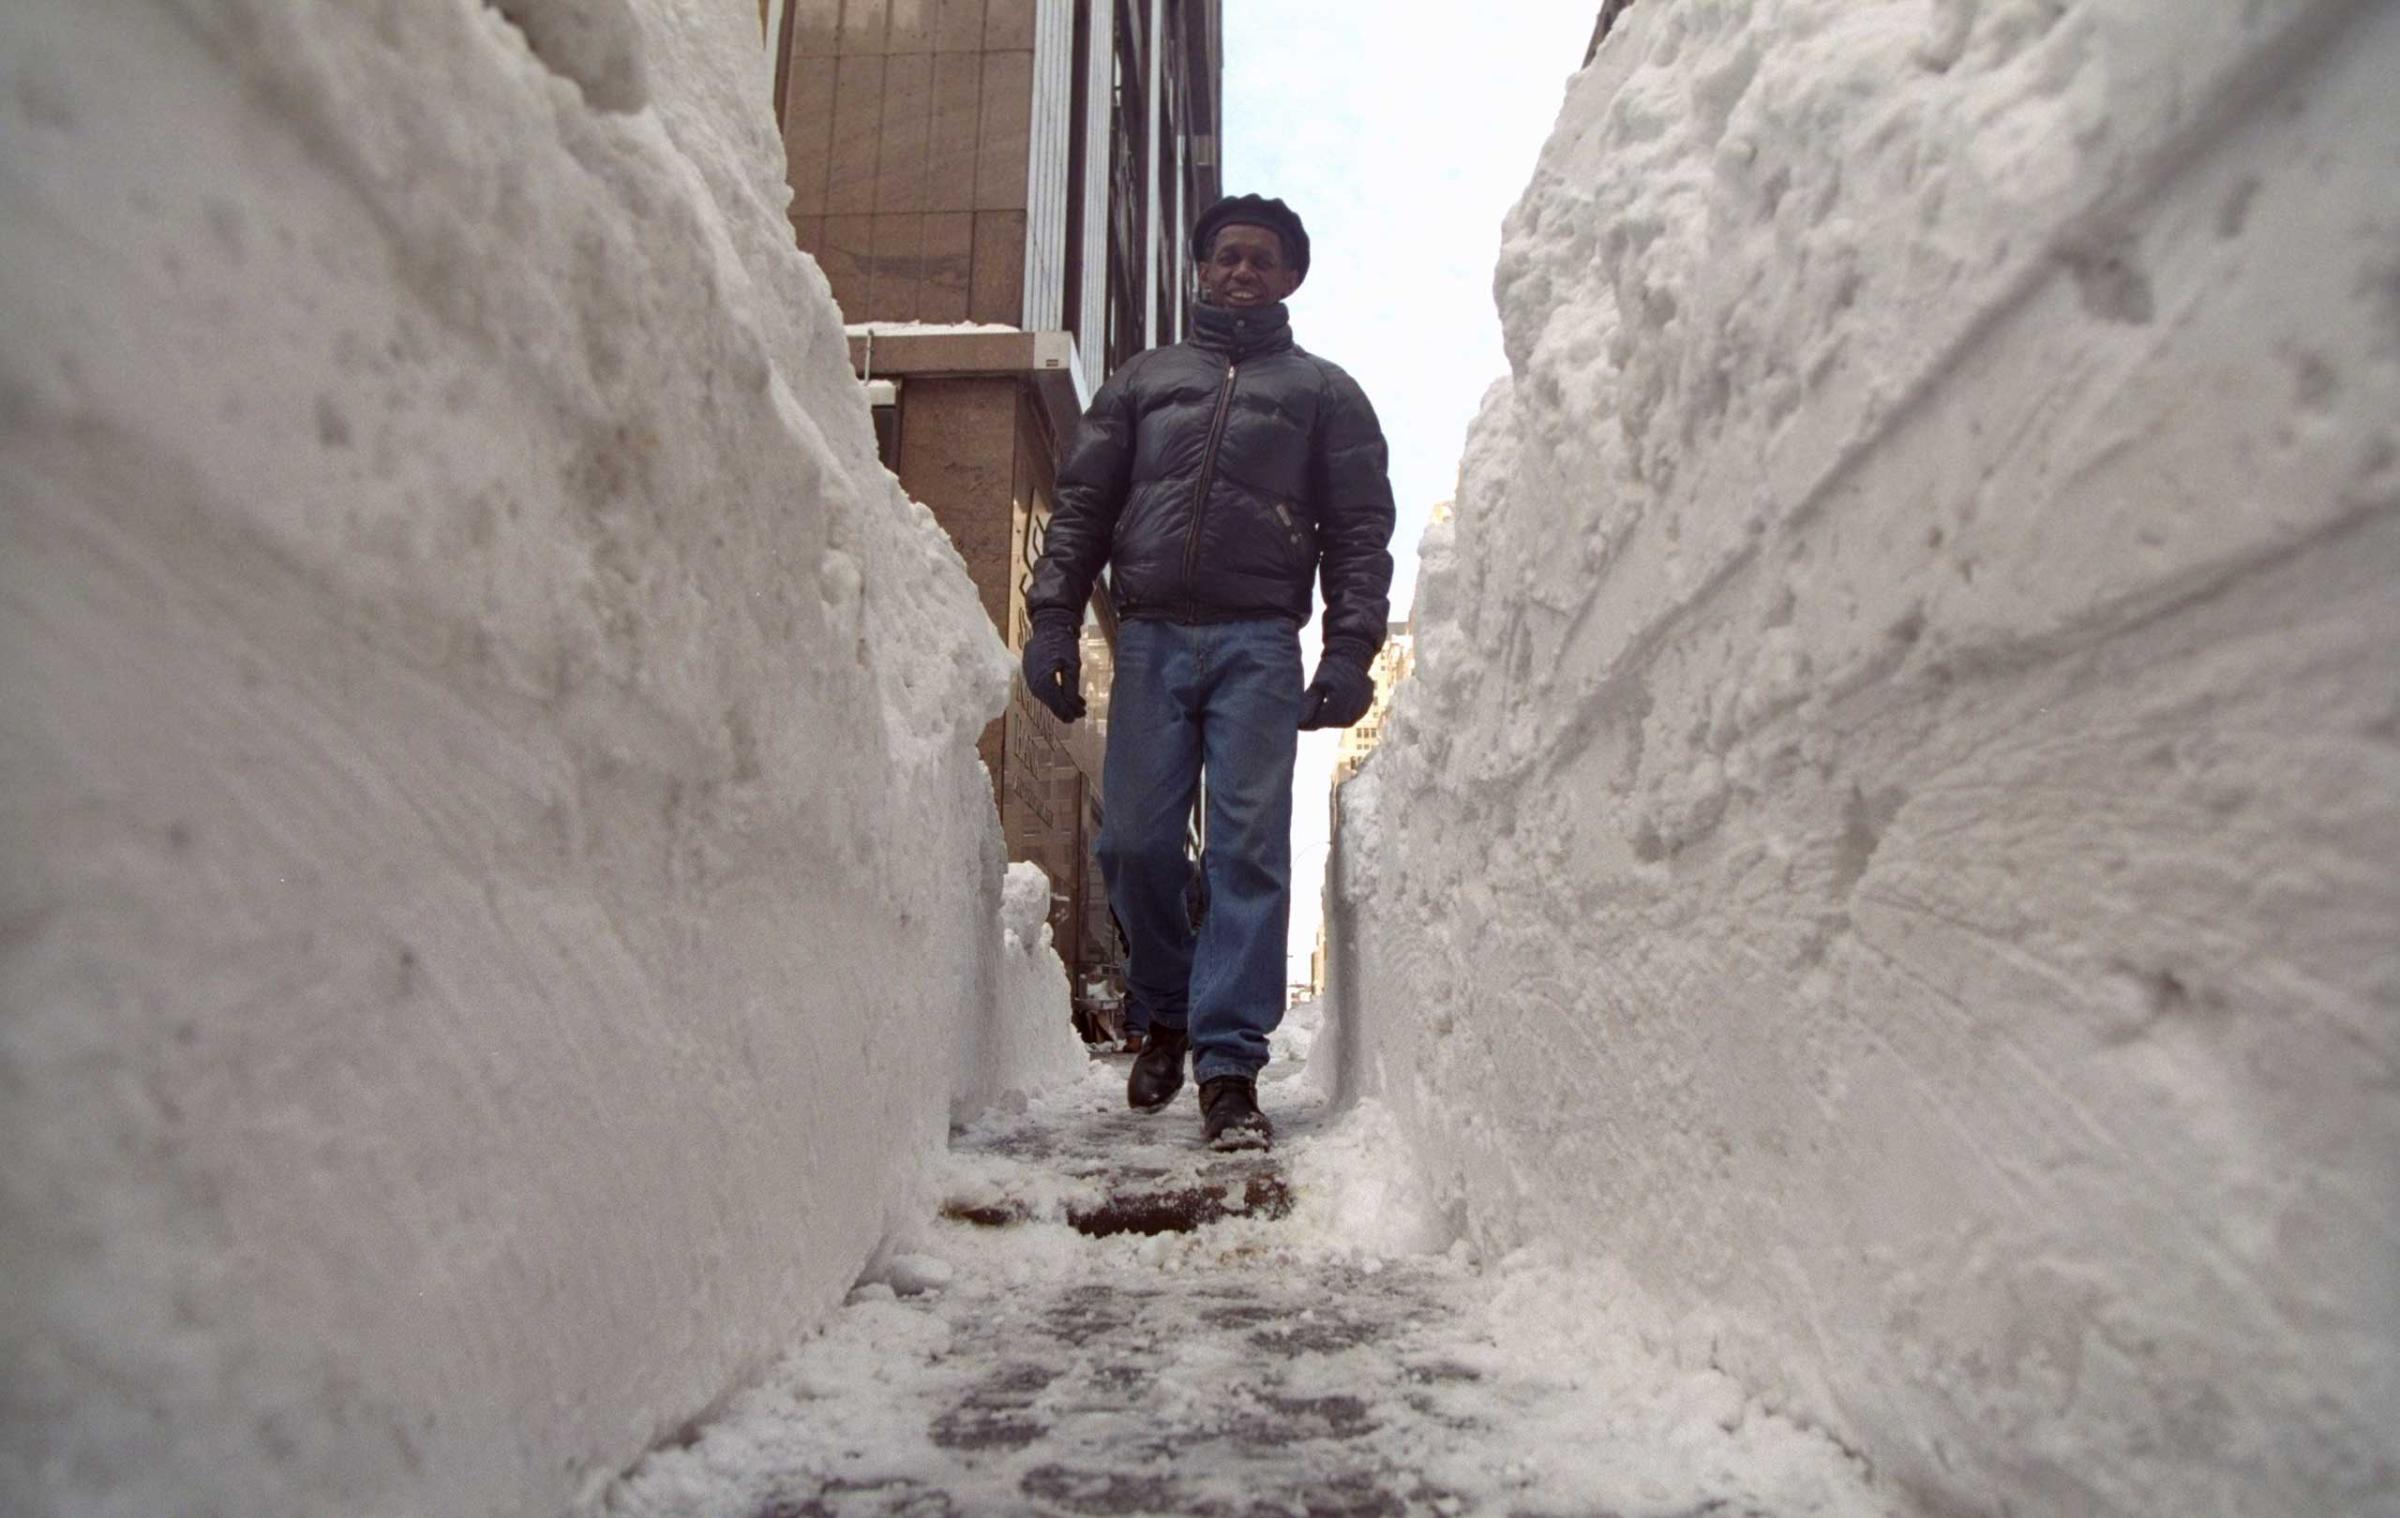 Huge tunnels dug out of the snow allow New Yorkers to get on